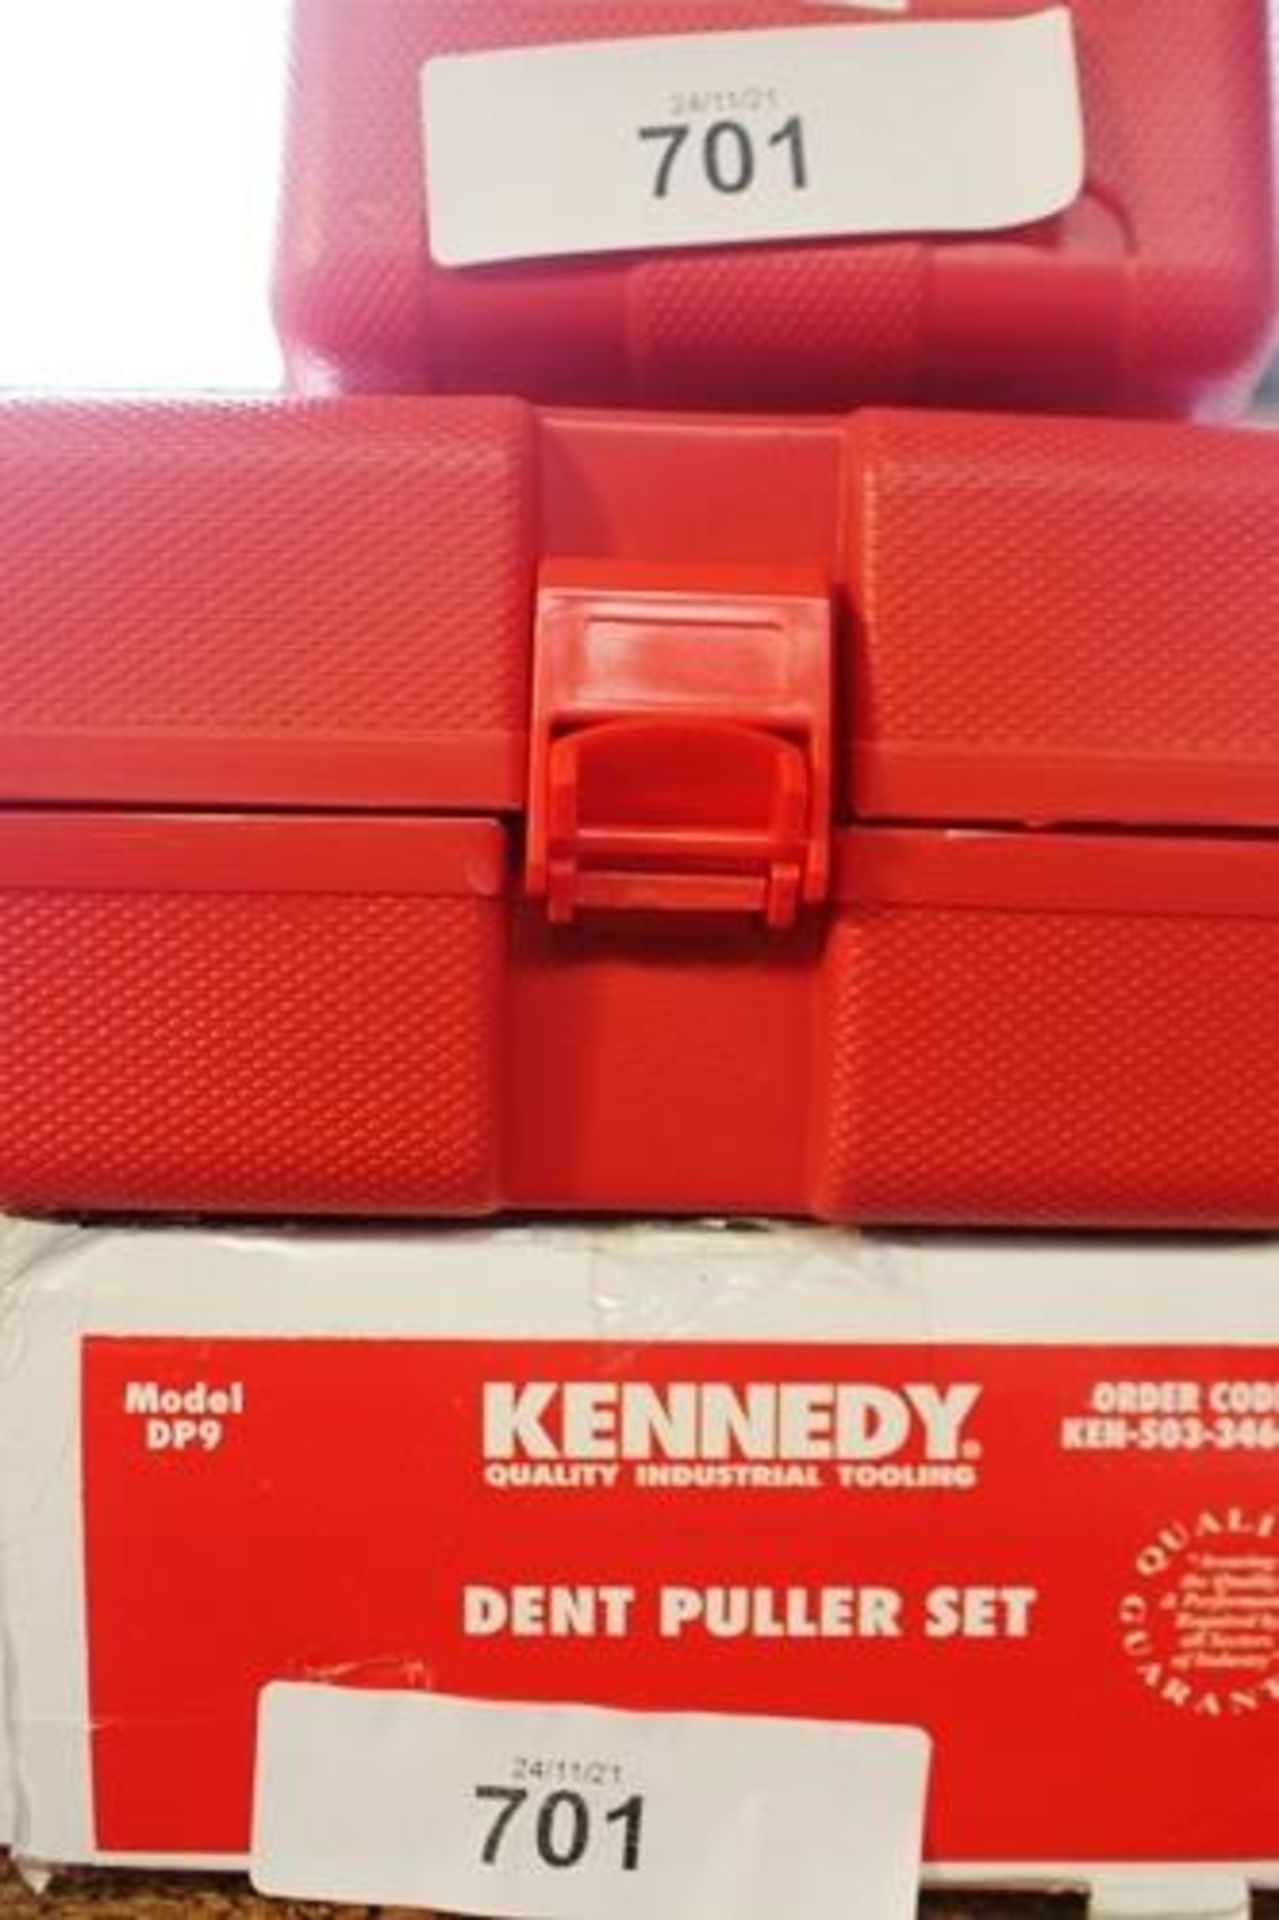 1 x Kennedy dent puller set, 1 x Kennedy 5T and 1 x 2T bottles jacks and 1 x ALB 30558 vacuum - Image 2 of 4